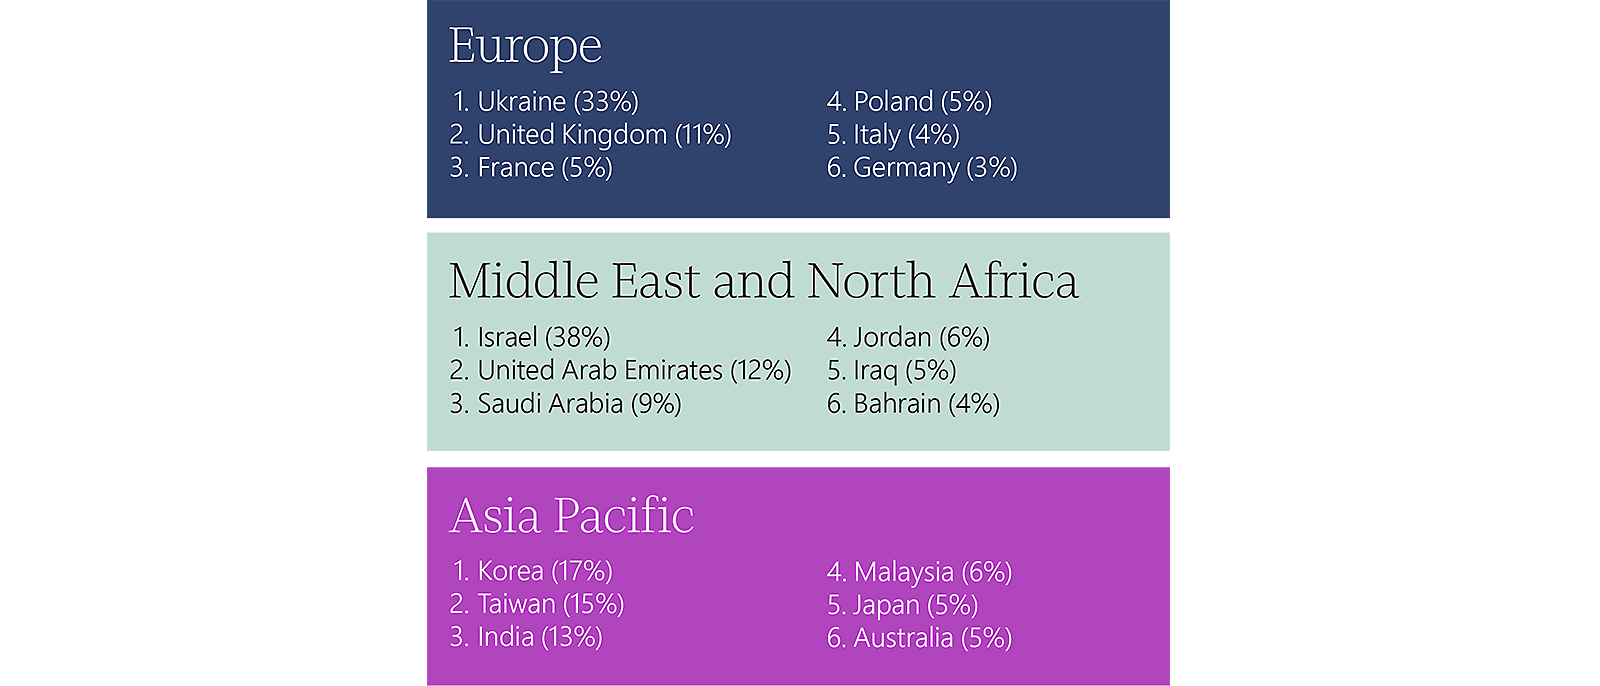 1-Geographical data: Europe - 4, Poland - 4, Middle East and North Africa - 2.2, Asia Pacific - 2, Wenc - 61